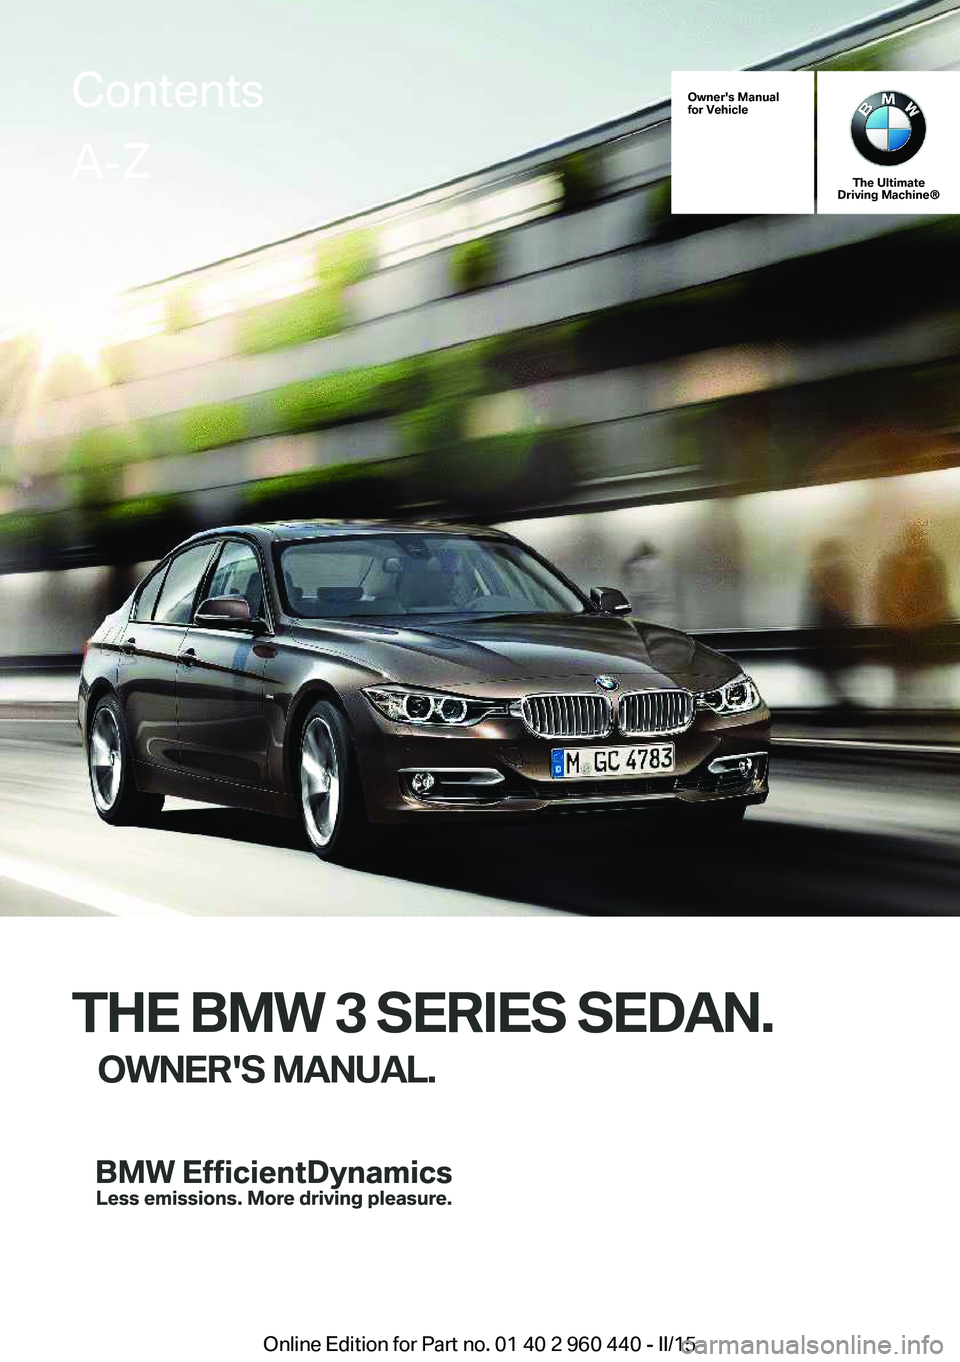 BMW 340I SEDAN 2016  Owners Manual Owner's Manual
for Vehicle
The Ultimate
Driving Machine®
THE BMW 3 SERIES SEDAN.
OWNER'S MANUAL.
ContentsA-Z
Online Edition for Part no. 01 40 2 960 440 - II/15   